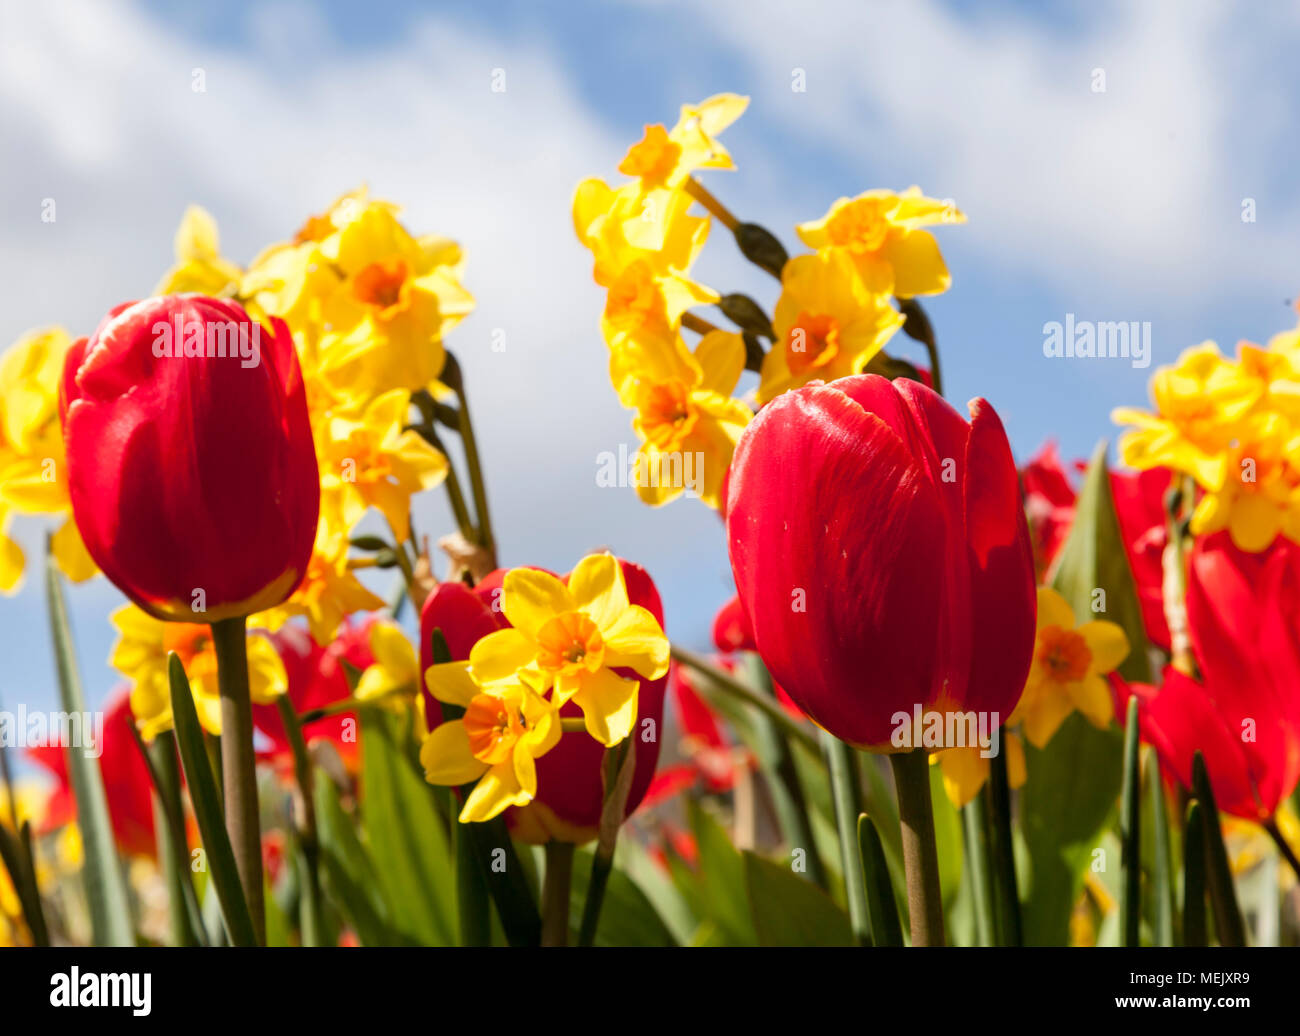 Tulips and Daffodils against sky in formal garden Stock Photo